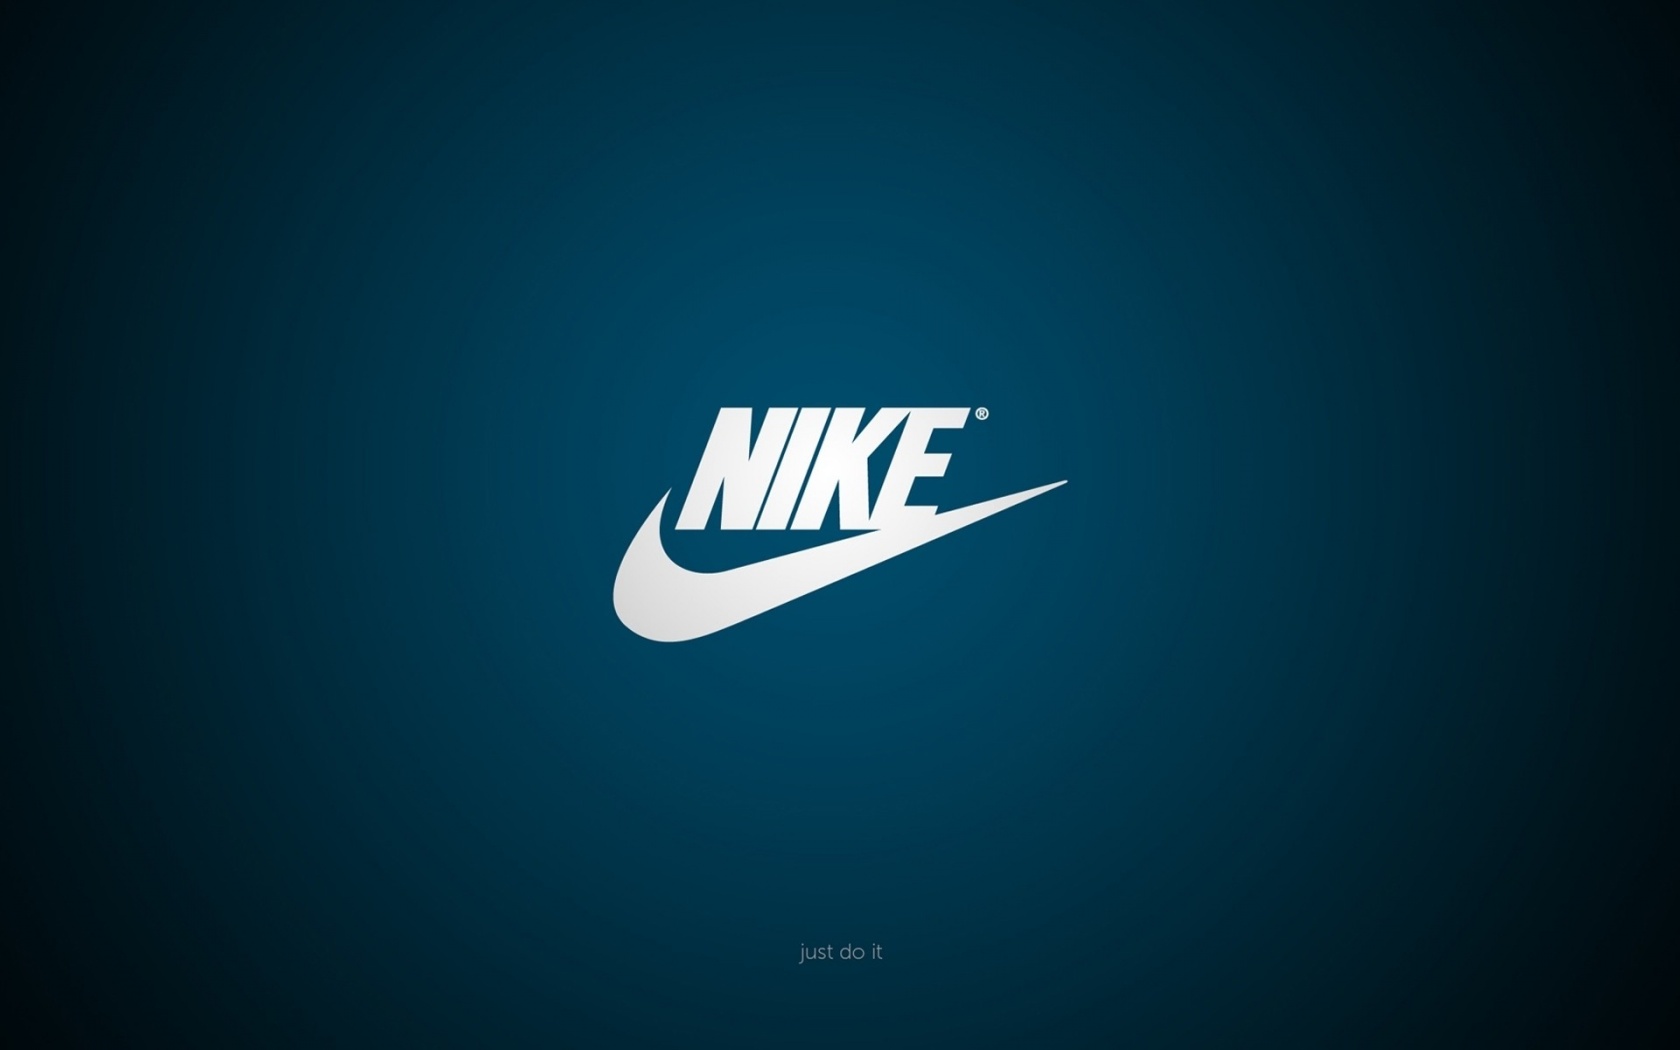 Gallery For gt Nike Logo Just Do It Wallpaper Basketball